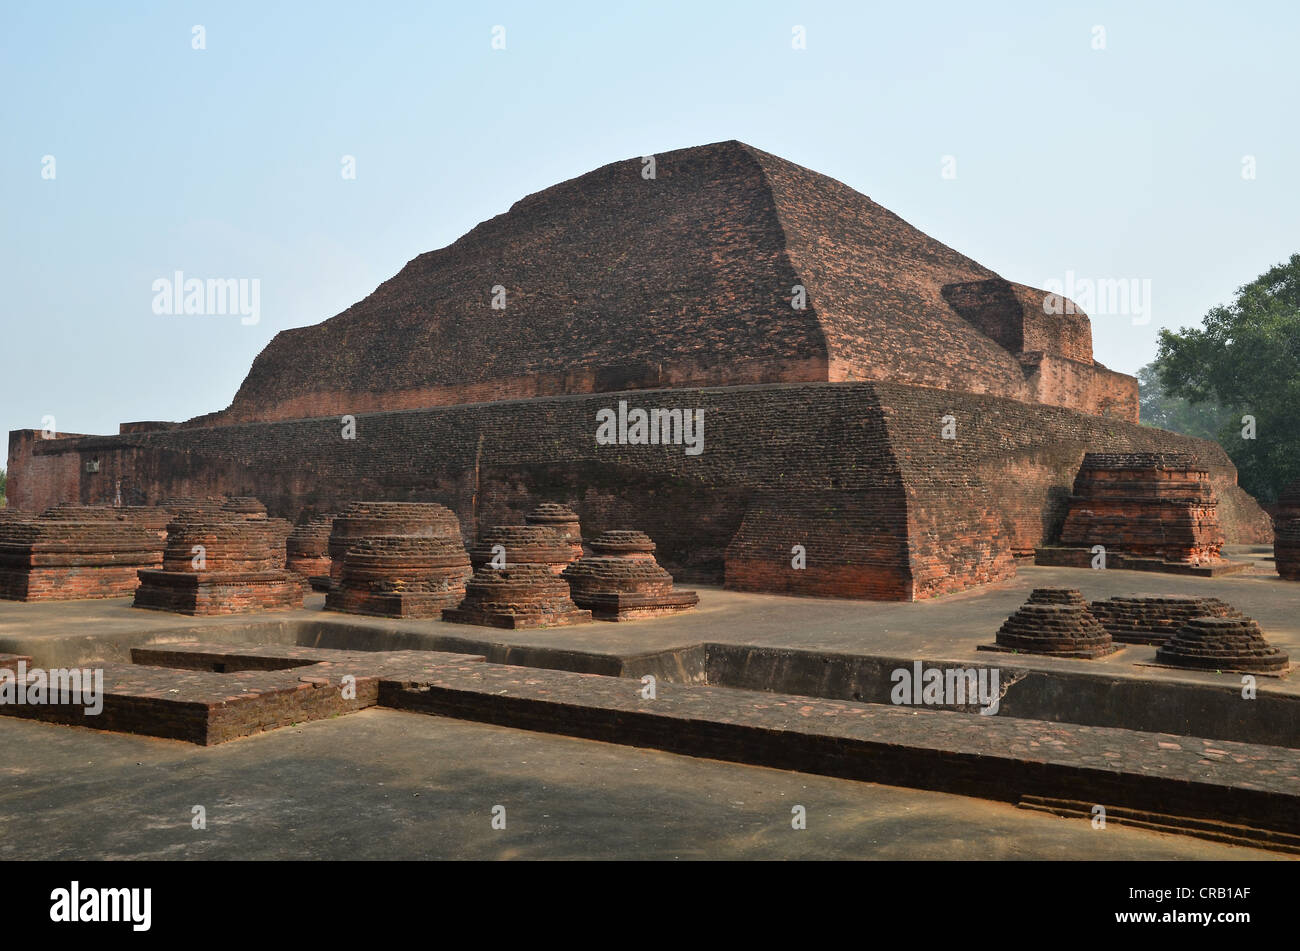 Buddhist archaeological site and an important Buddhist pilgrimage destination, the ruins of the ancient University of Nalanda Stock Photo